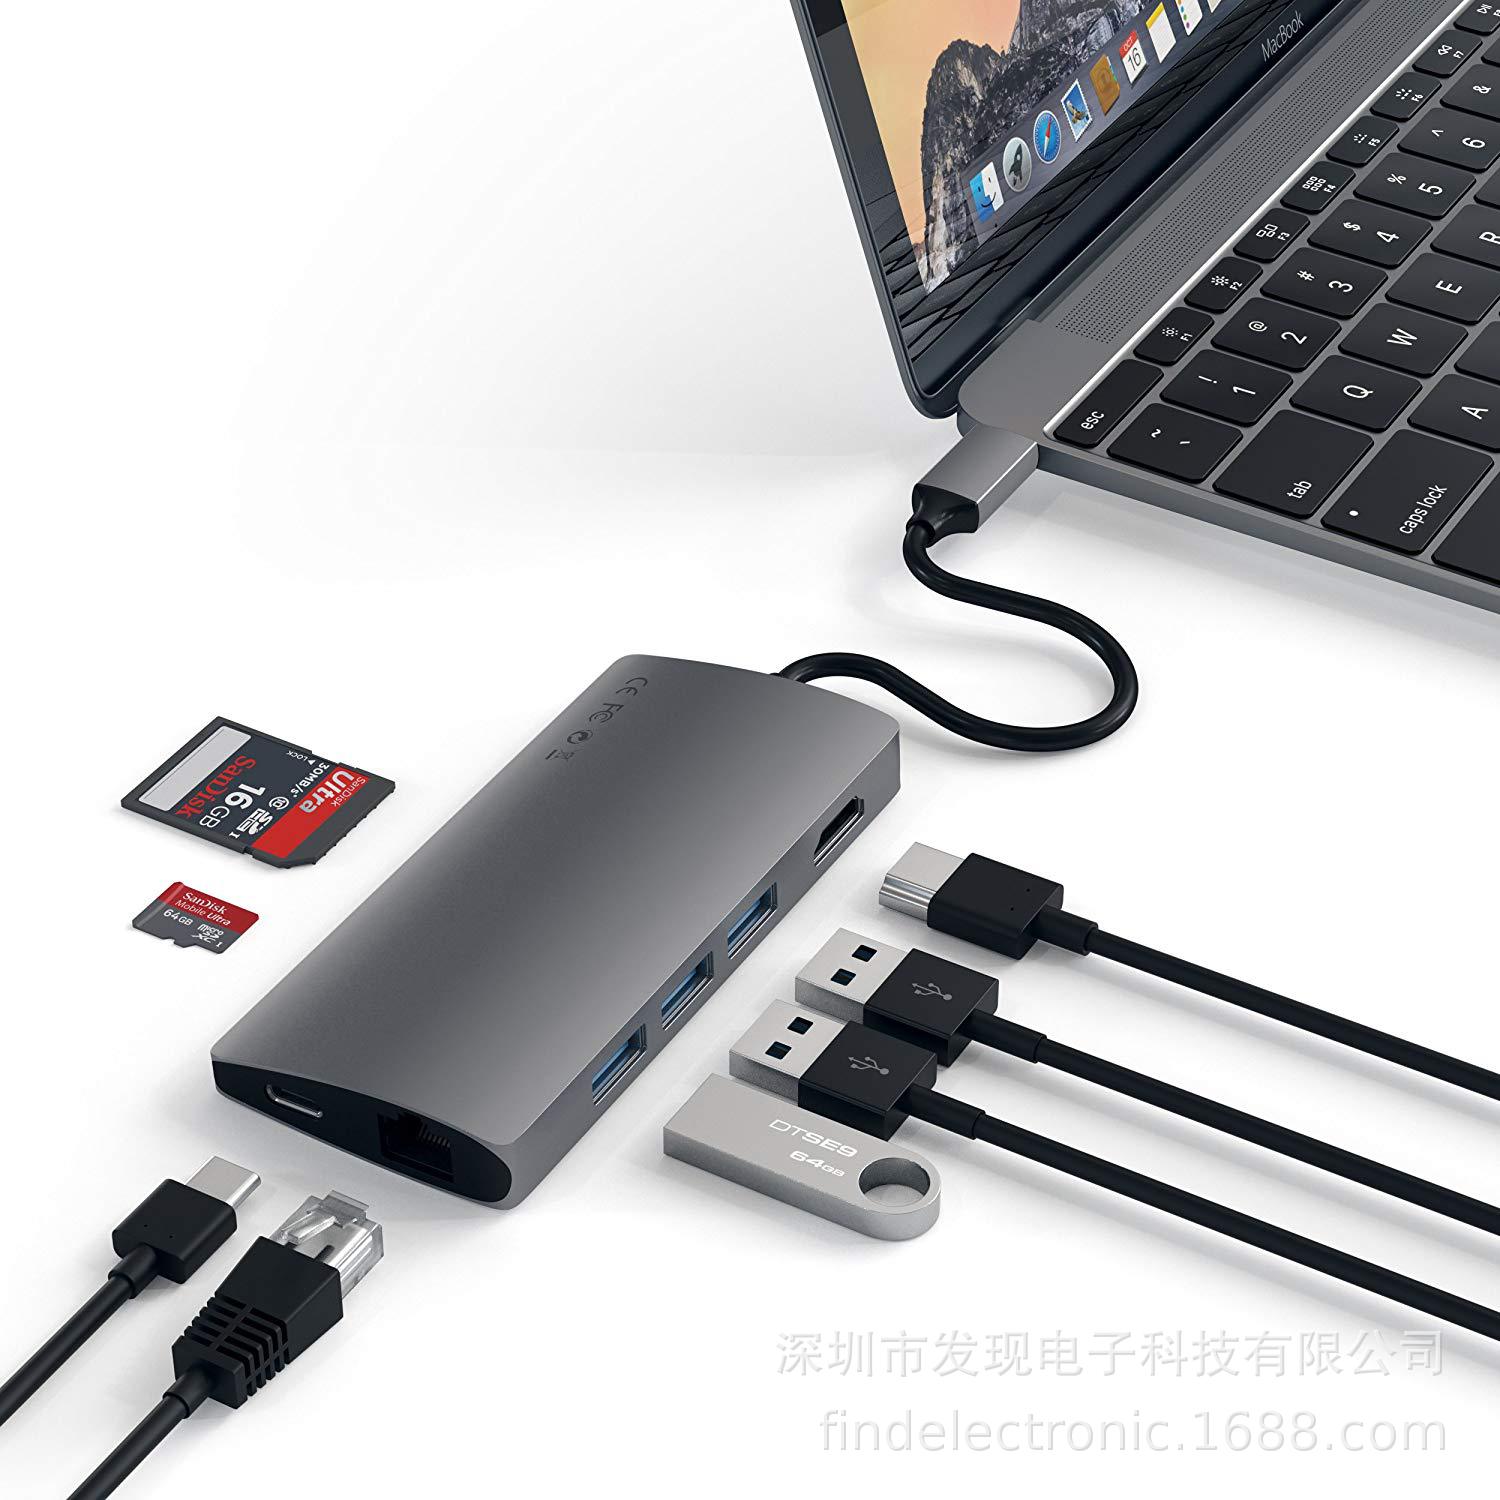 USB C USB3.1 TYPE C HUB 8 in 1 USB HUB All in One USB C to HDMI Card Reader LAN PD Charging Adapter 4K รุ่น 50538 for Huawei Mate 10/ P20/ P30, Microsoft Surface, Apple MacBook, Macbook Pro, Samsung Galaxy S8/+ / Note8/ S9/+ / Note9/ S10/+